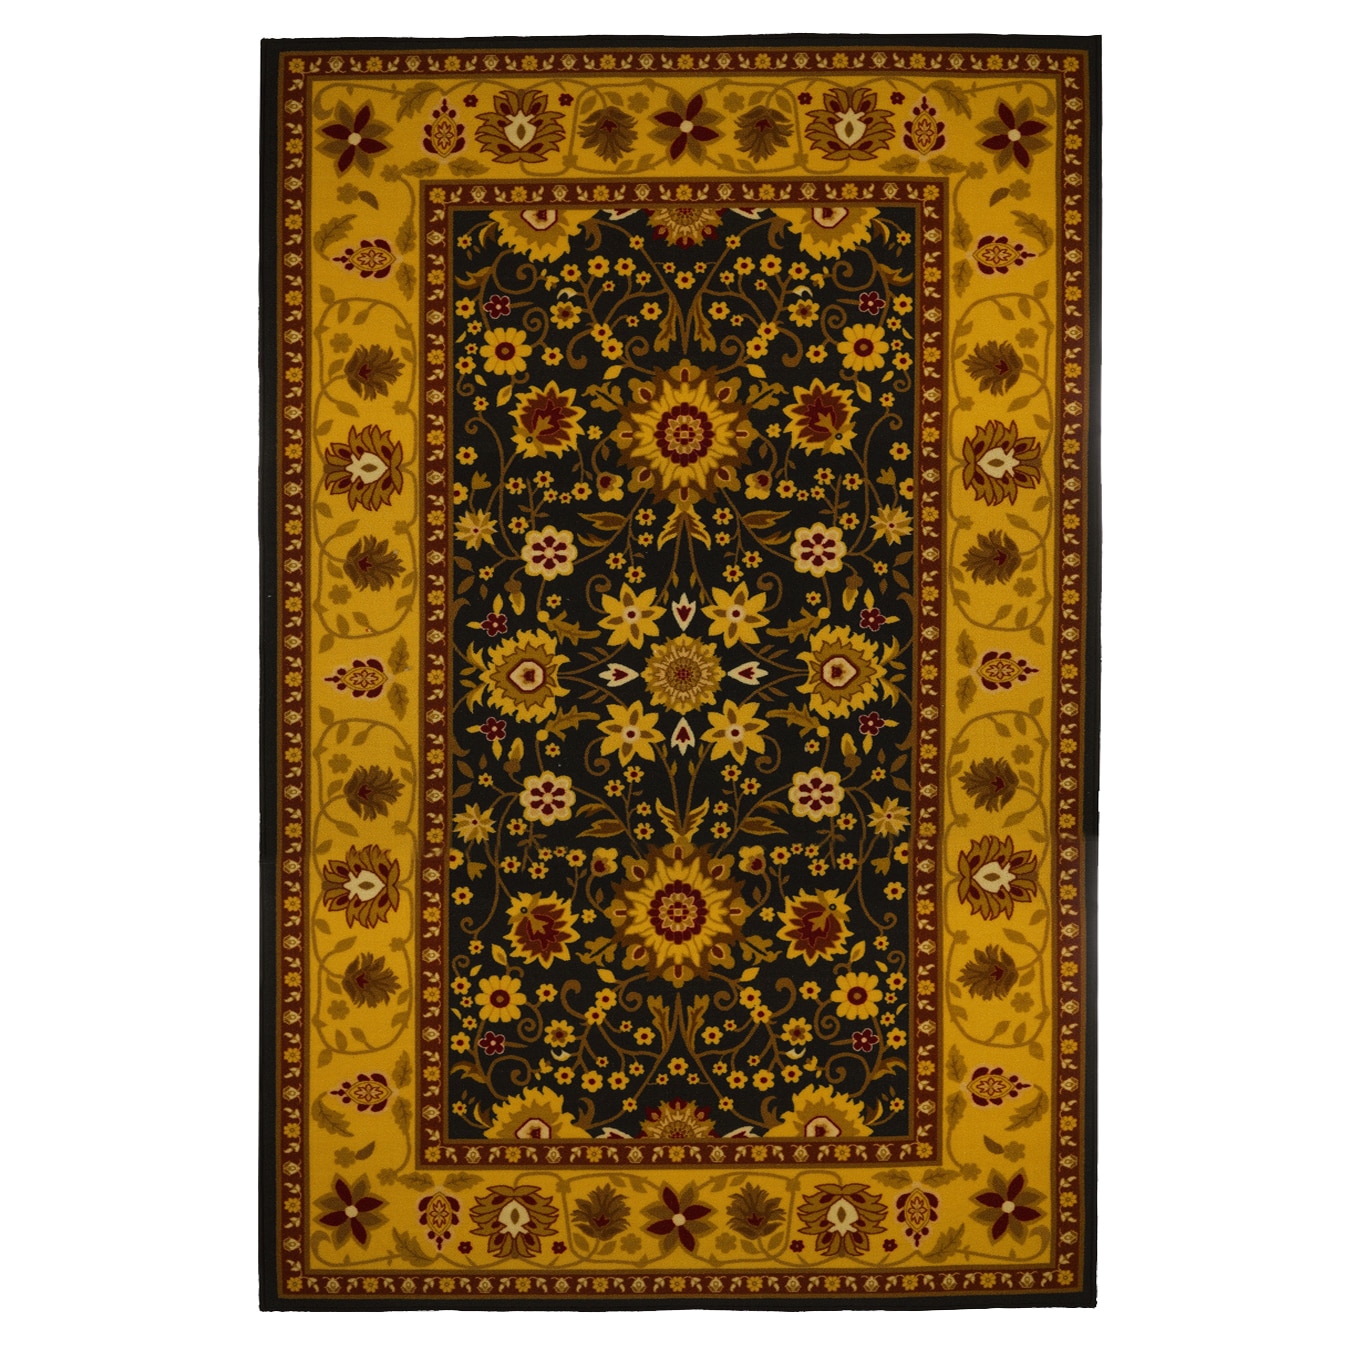 Gold/ Black Traditional Oriental Area Rug (8 X 10)